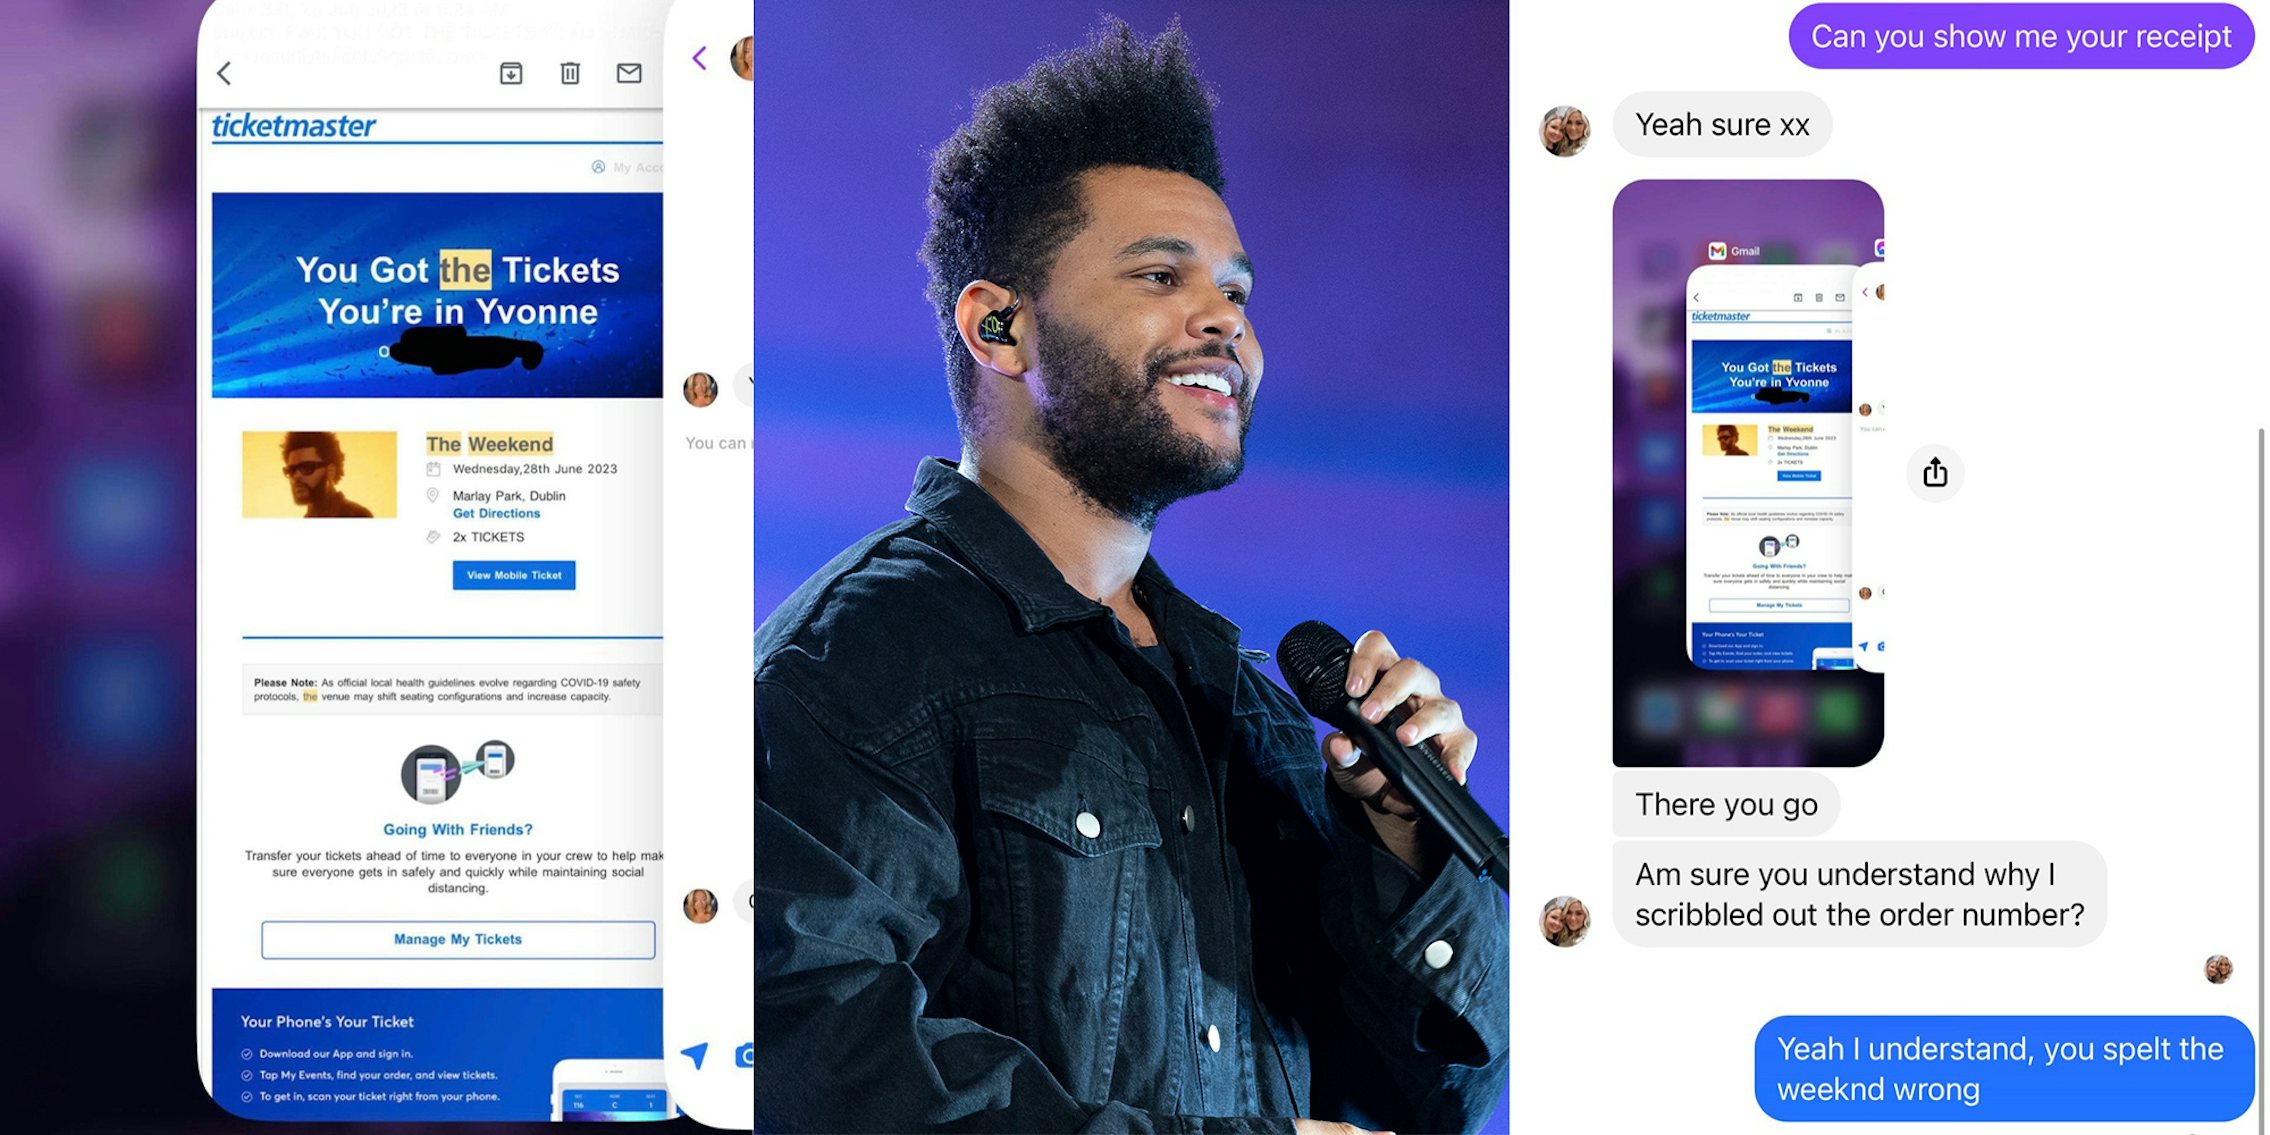 Scammer tries to sell The Weeknd tickets.